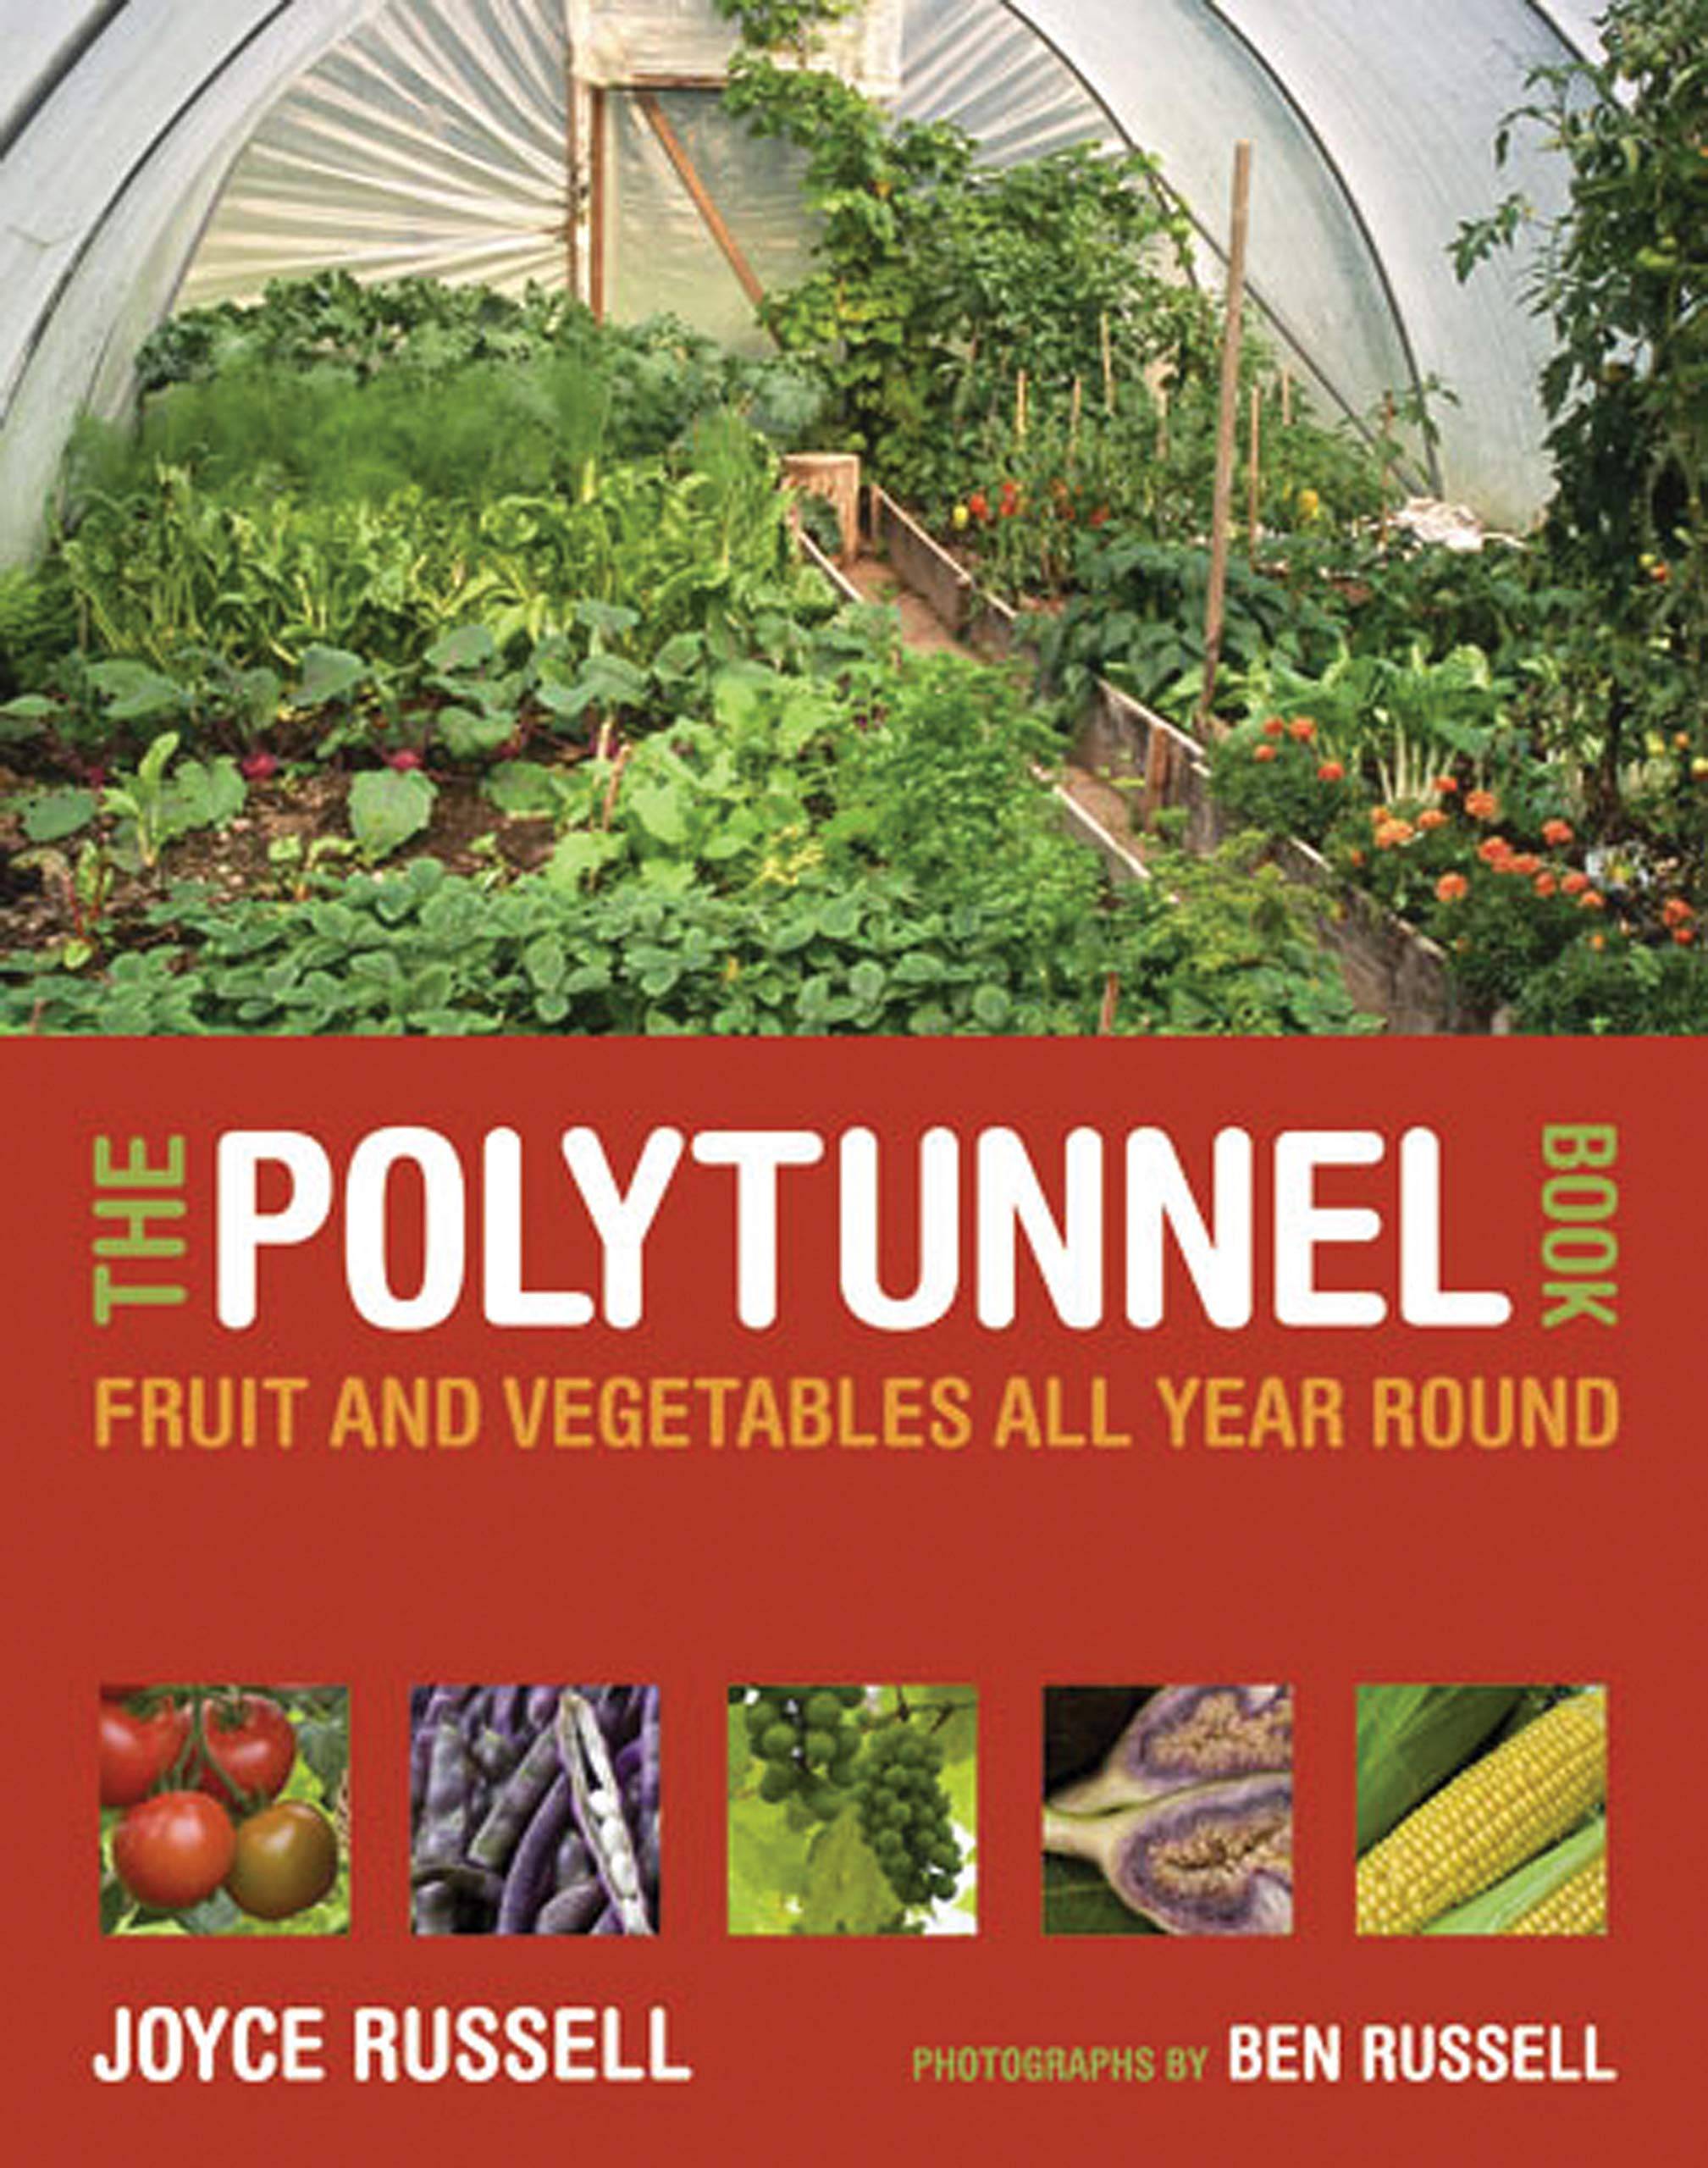 The polytunnel book by Joyce Russell & Ben Russell